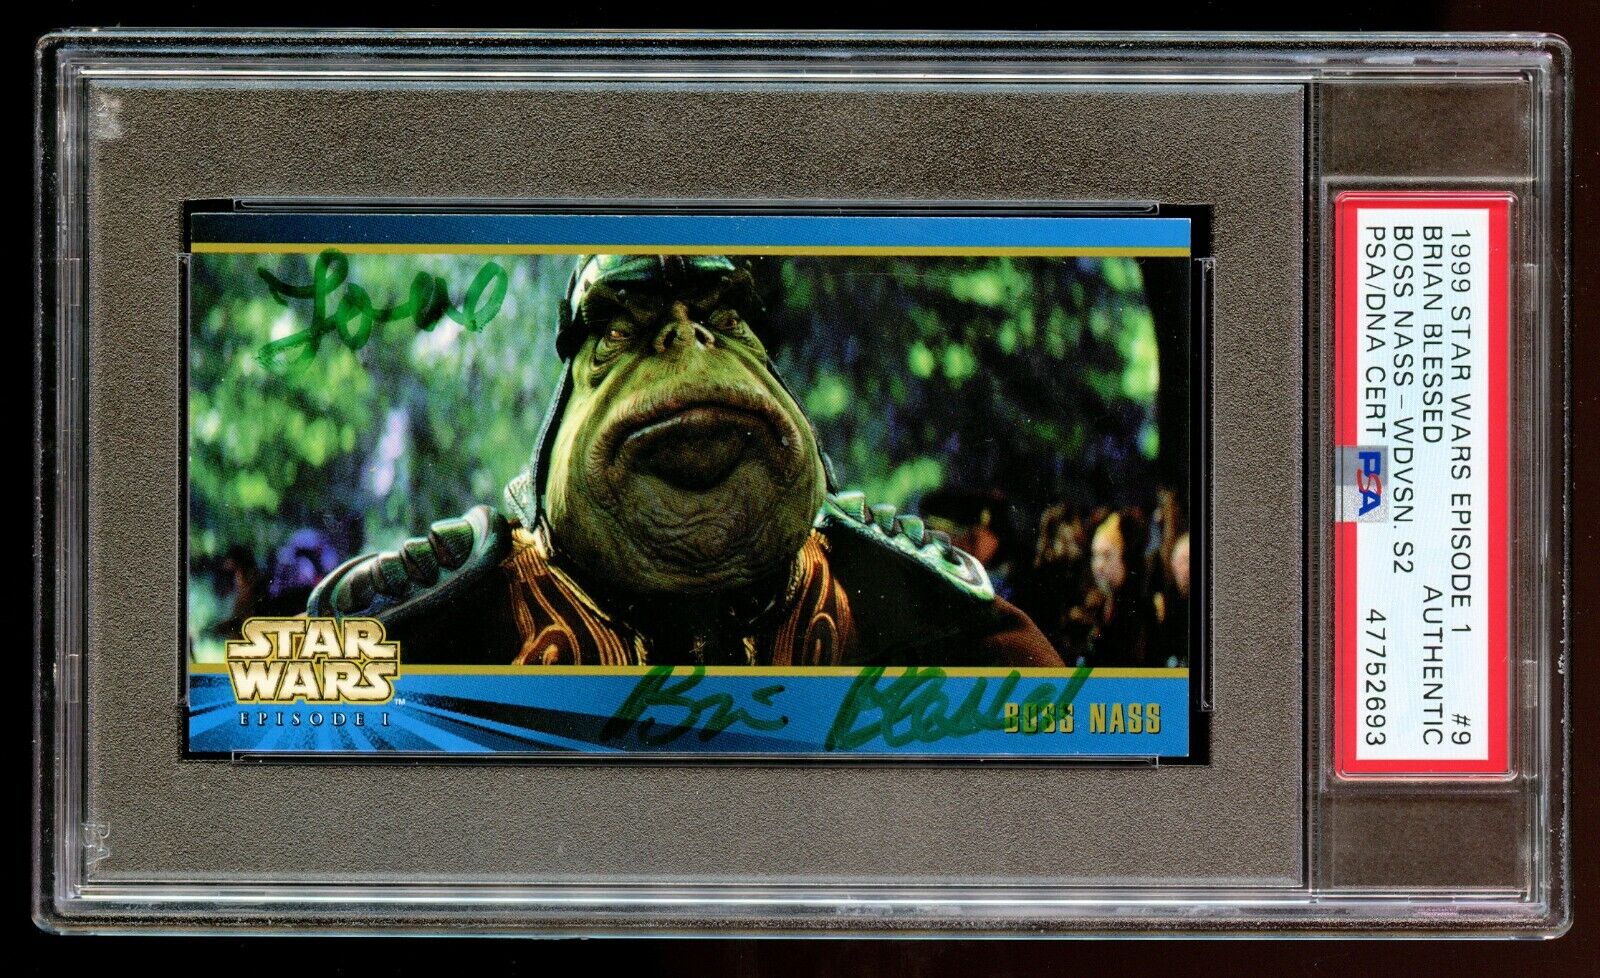 Brian Blessed #9 signed autograph 1999 Star Wars Episode 1 Boss Nass PSA Slabbed